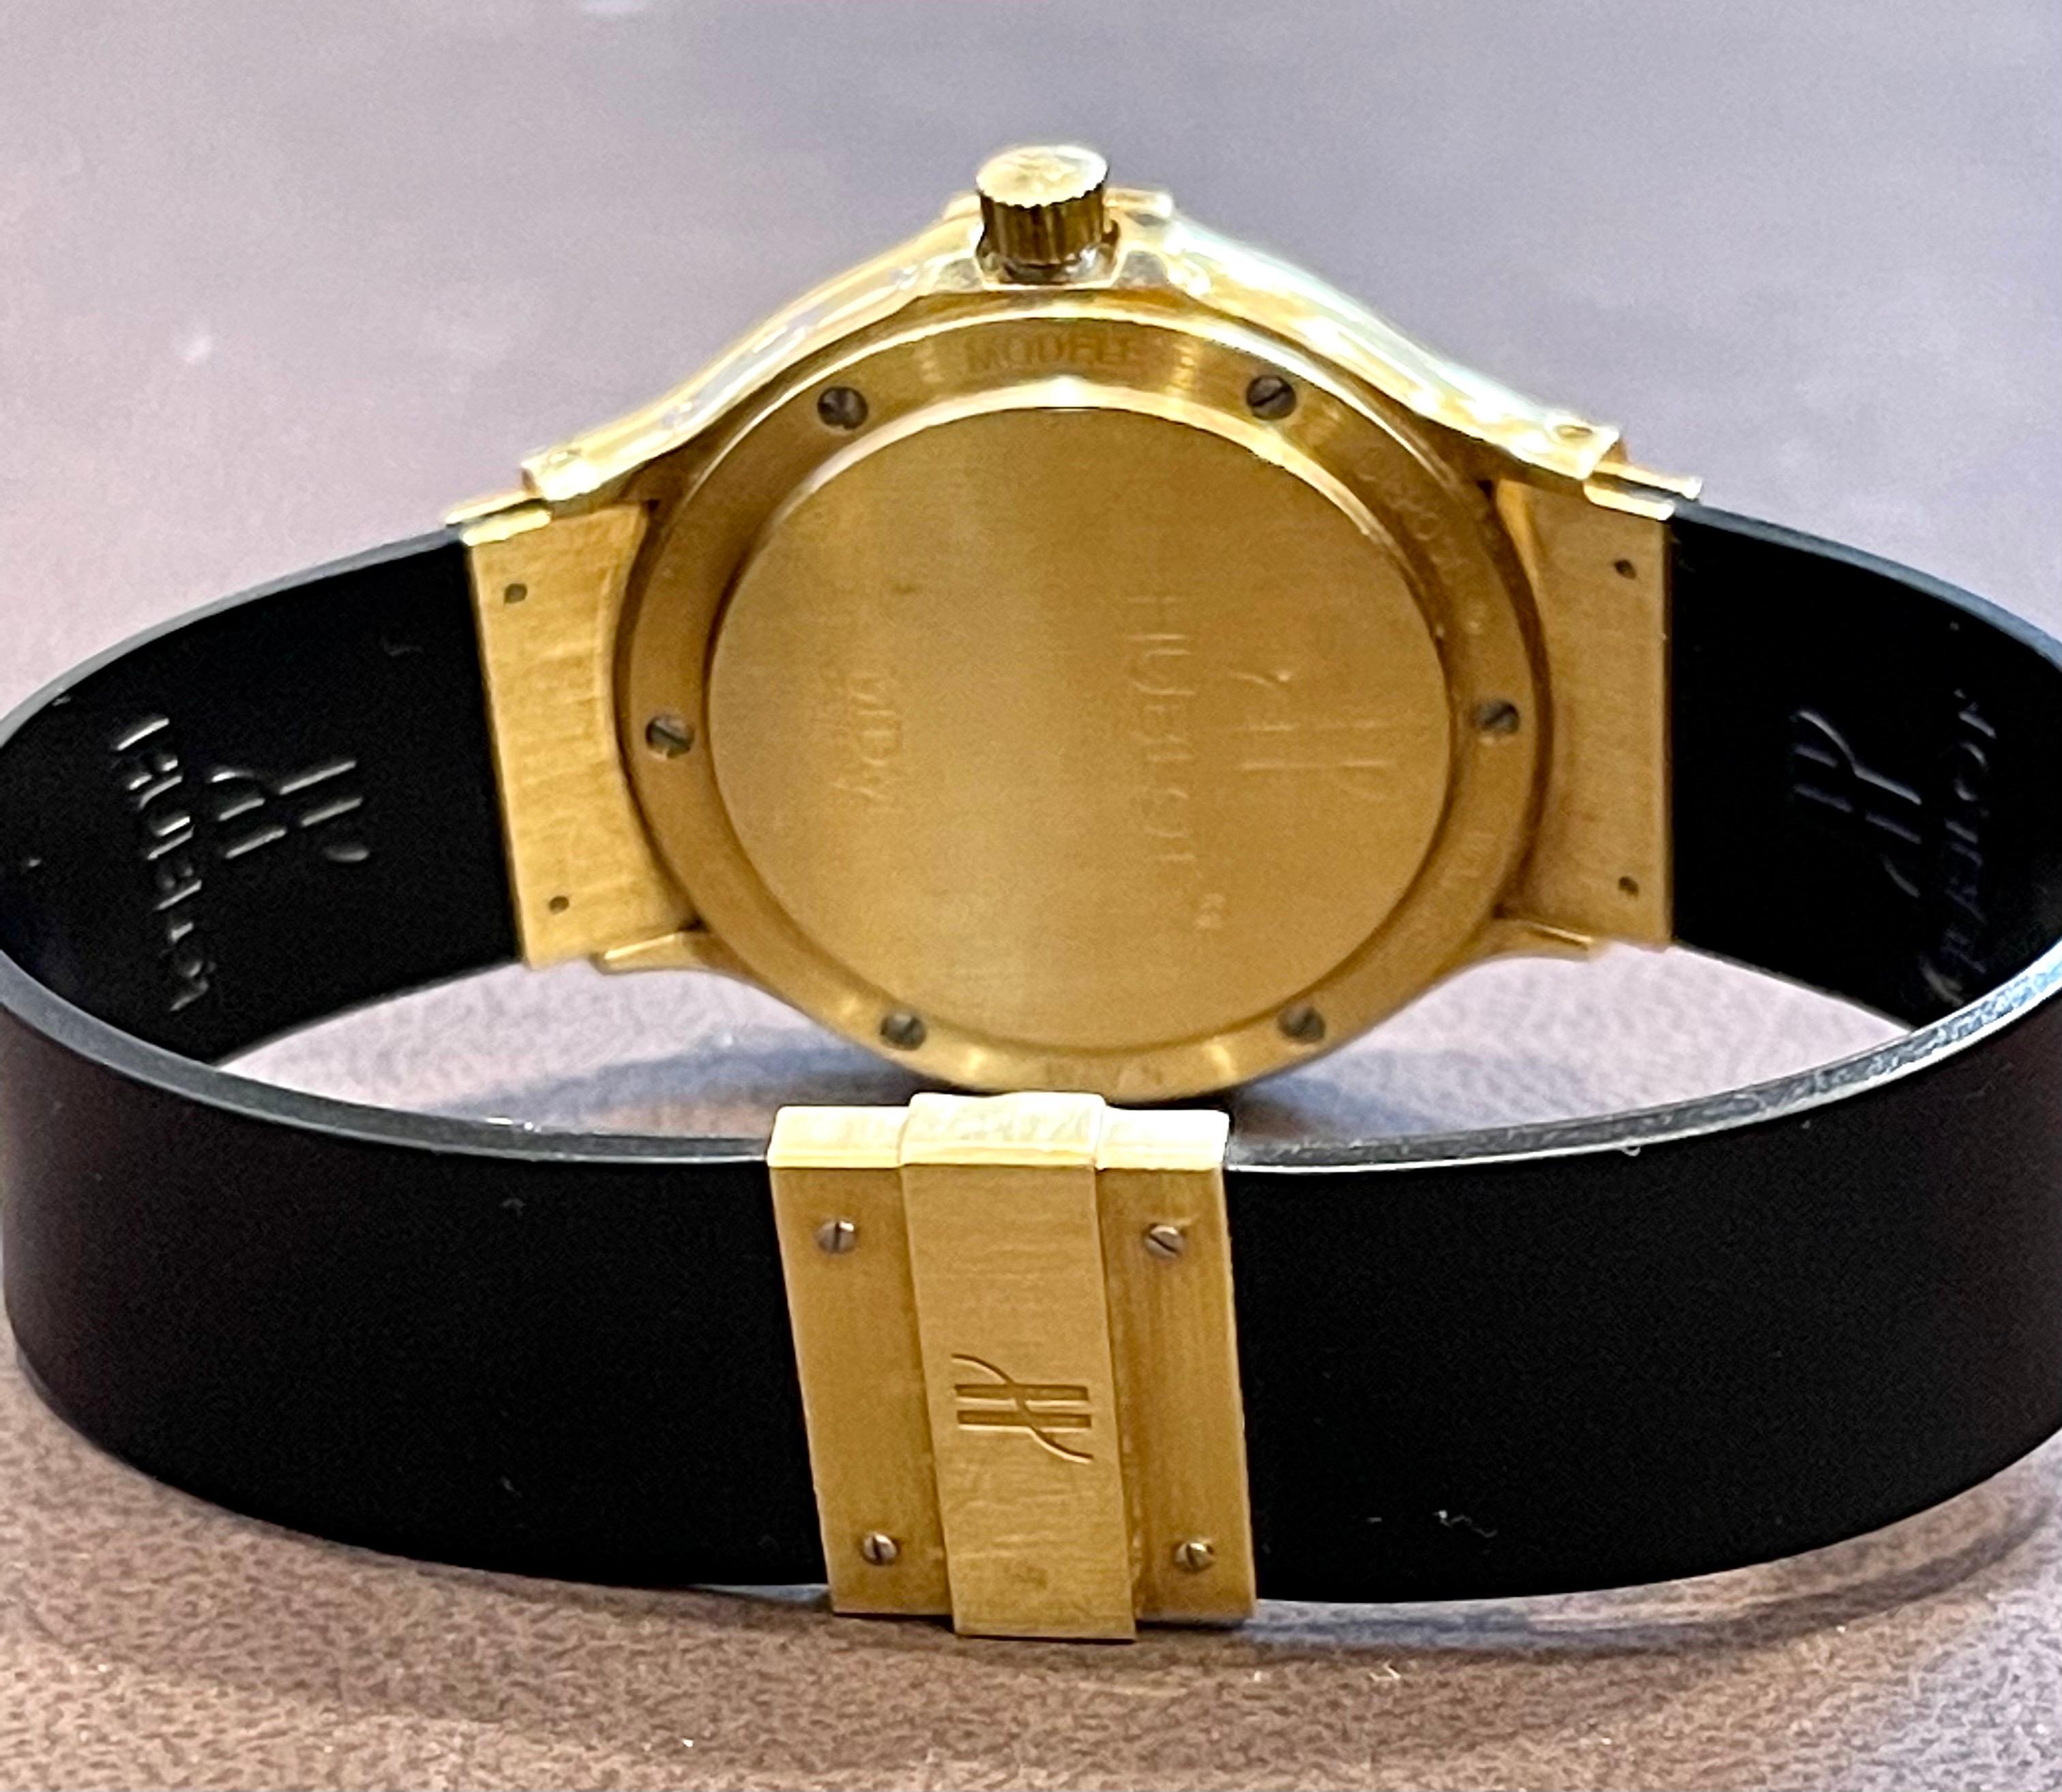 Hublot MDM 1581.3 18 Karat Yellow Gold Unisex Automatic Watch, White Dial In Excellent Condition For Sale In New York, NY